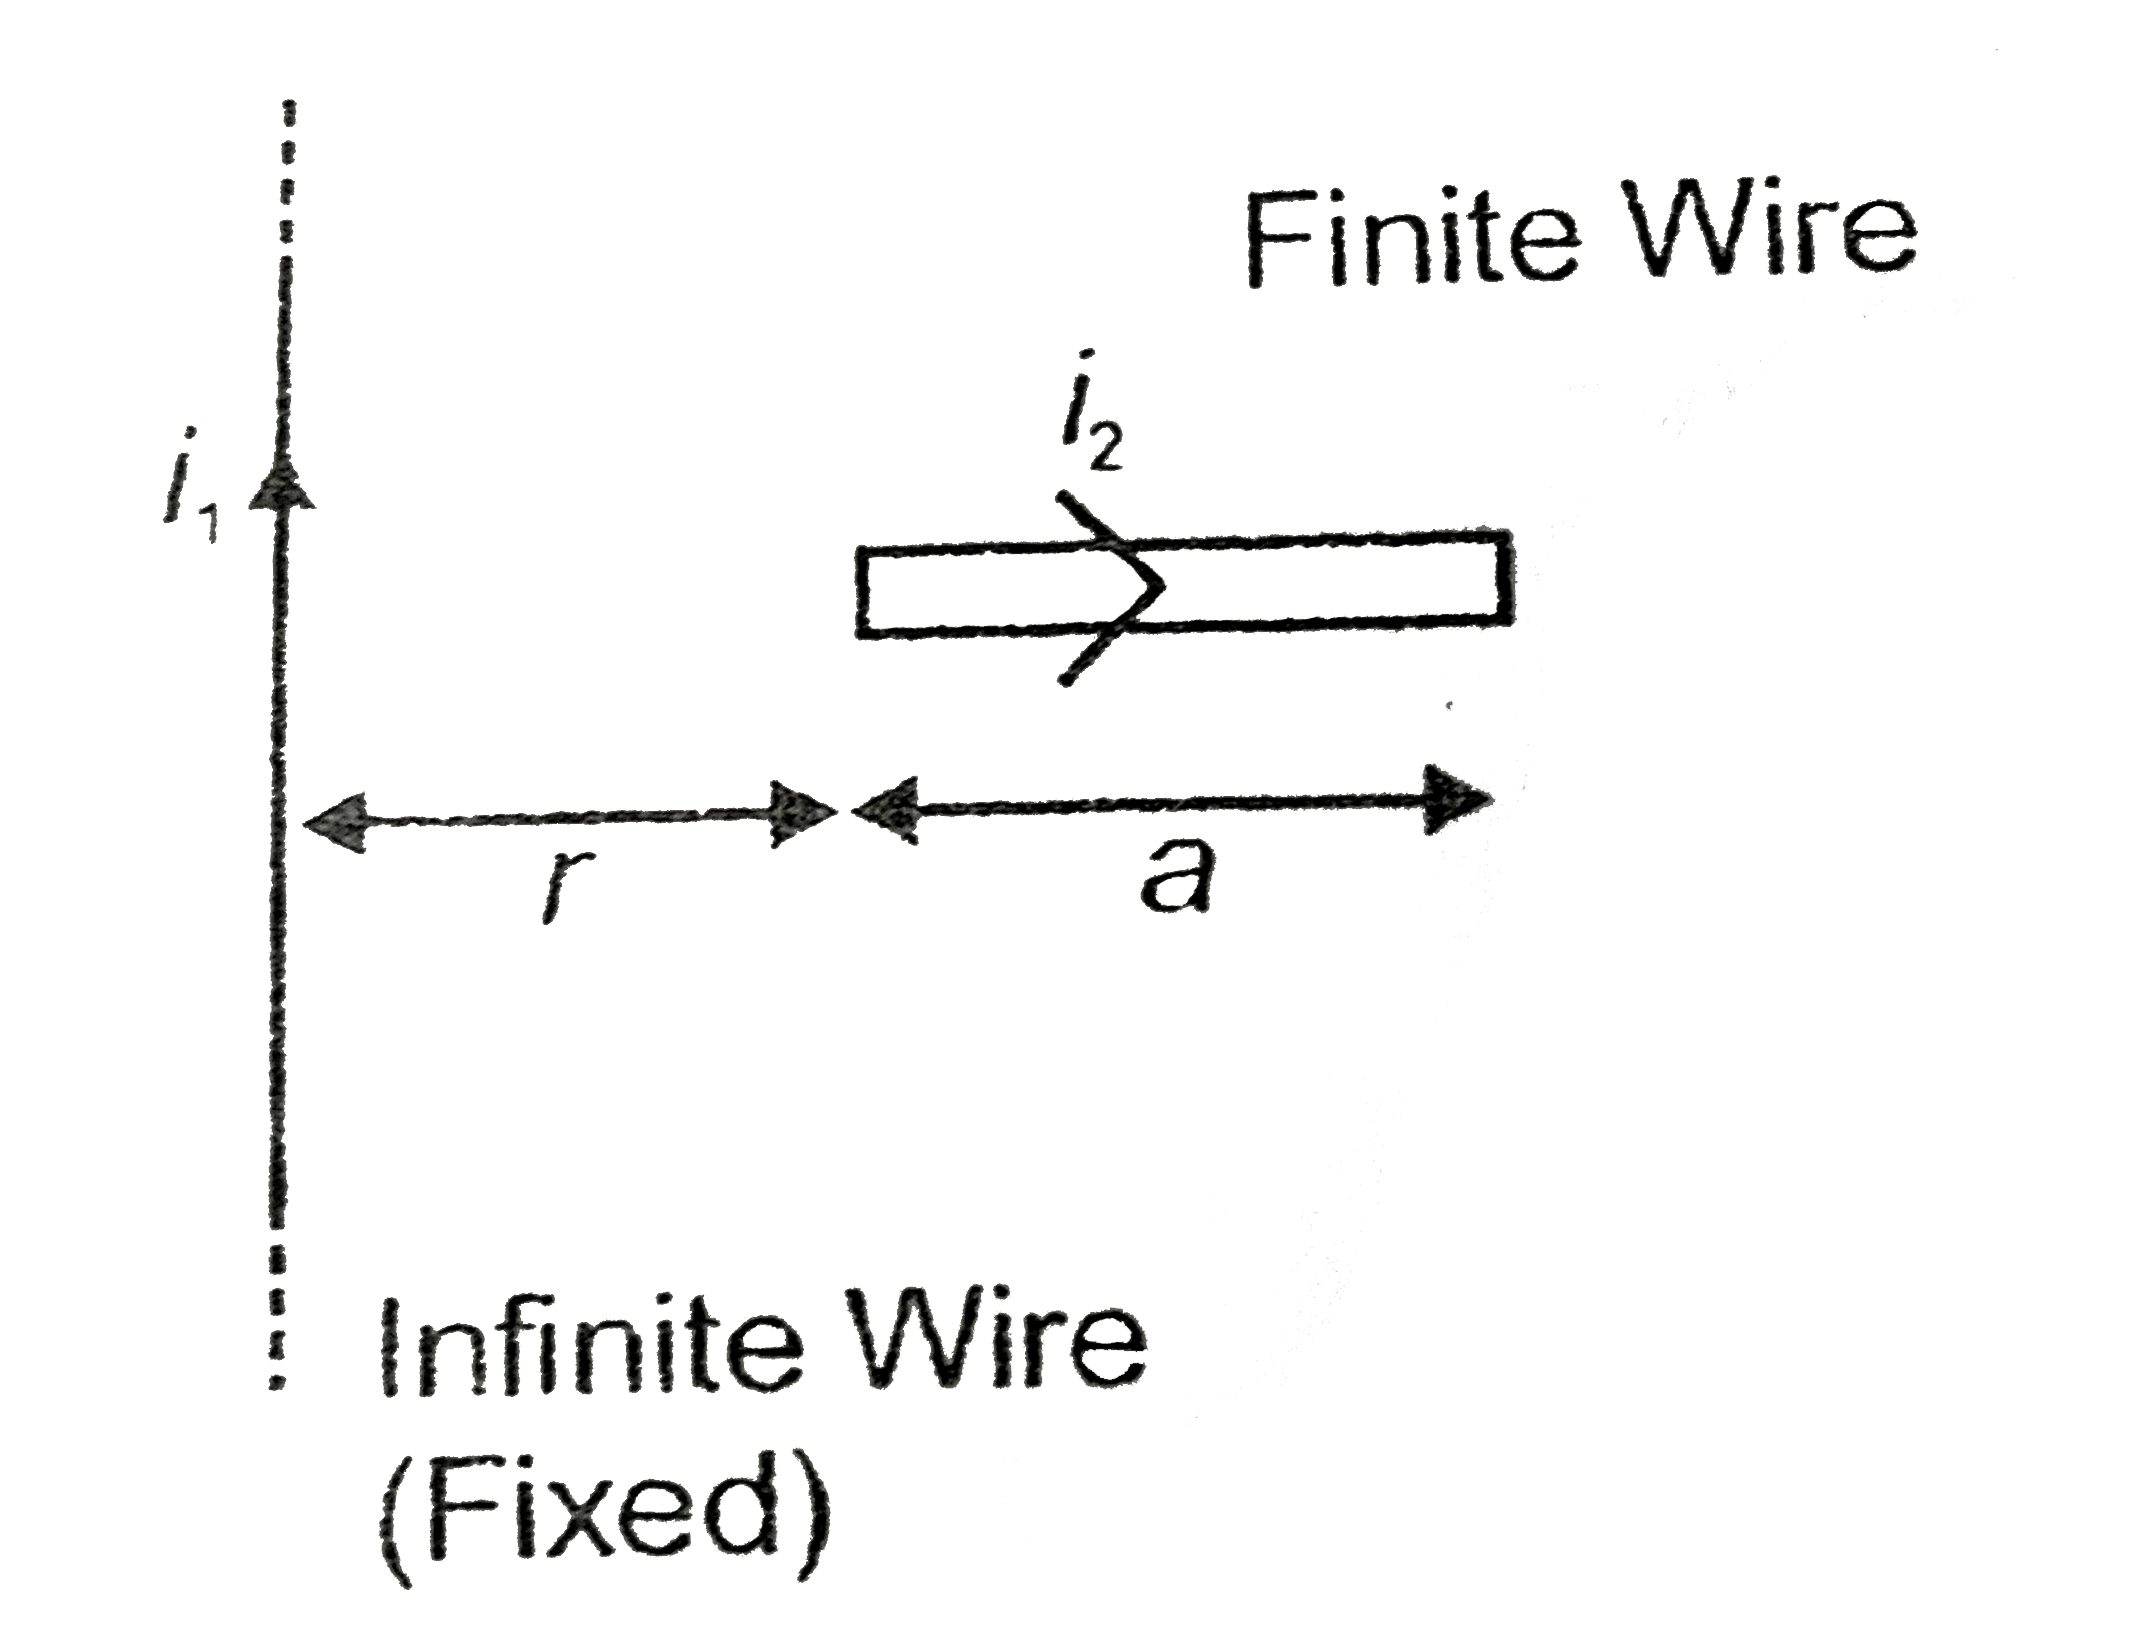 What is the magnetic force acting on the finite wire due to the fixed infinite wire shown here?      Strategy: We cannot use formula vec(F) = i vec(l) xx vec(B) to find the force as the magnetic field created by the fixed infinite wire is non-uniform. We have to consider an element on the finite wire, find force on it and integrate to obtain the net force.